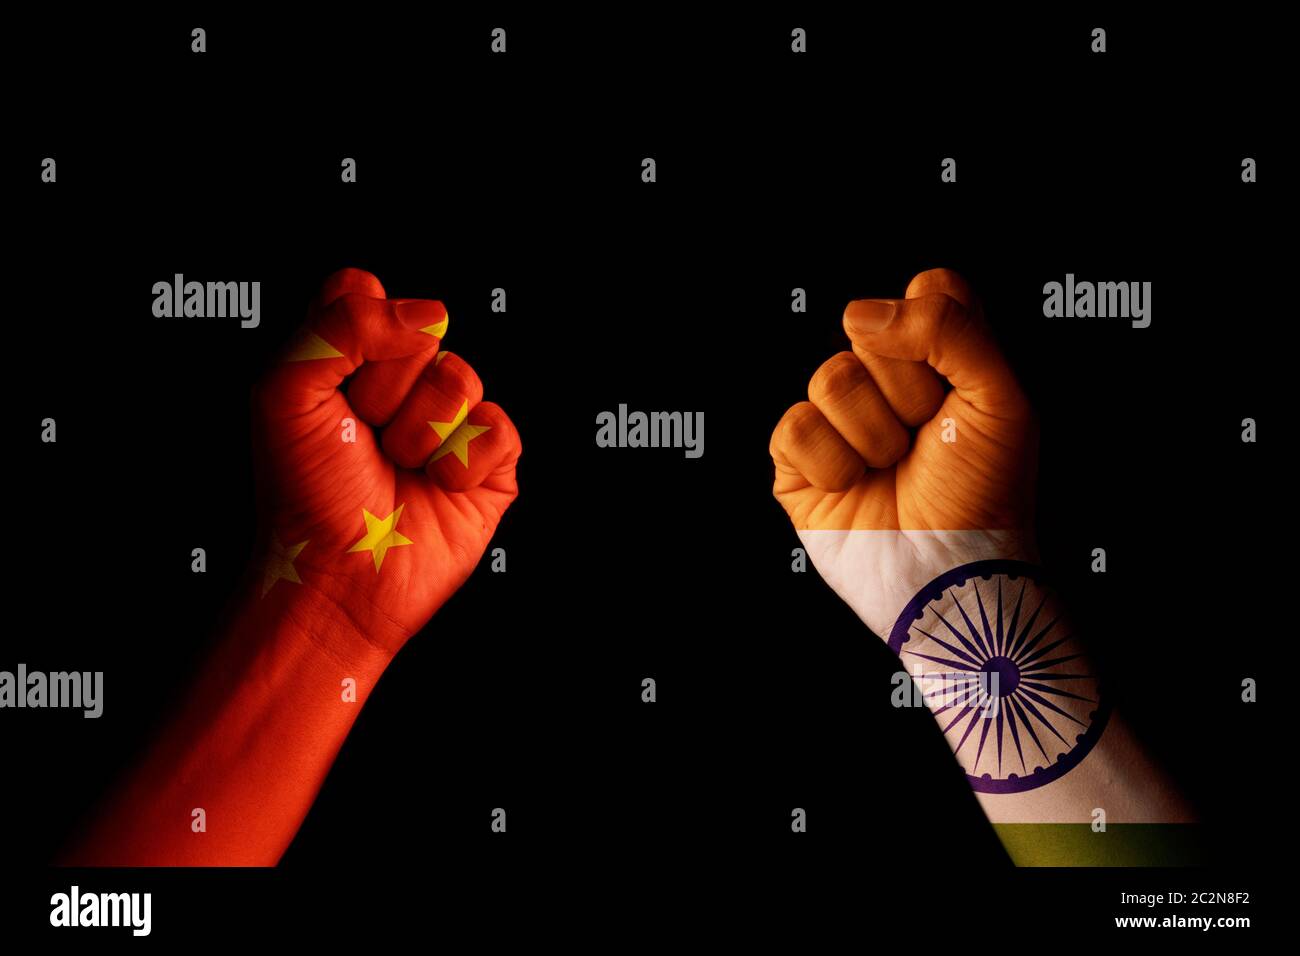 Concept of Dispute or conflict between India and China showing with fist hands. Stock Photo